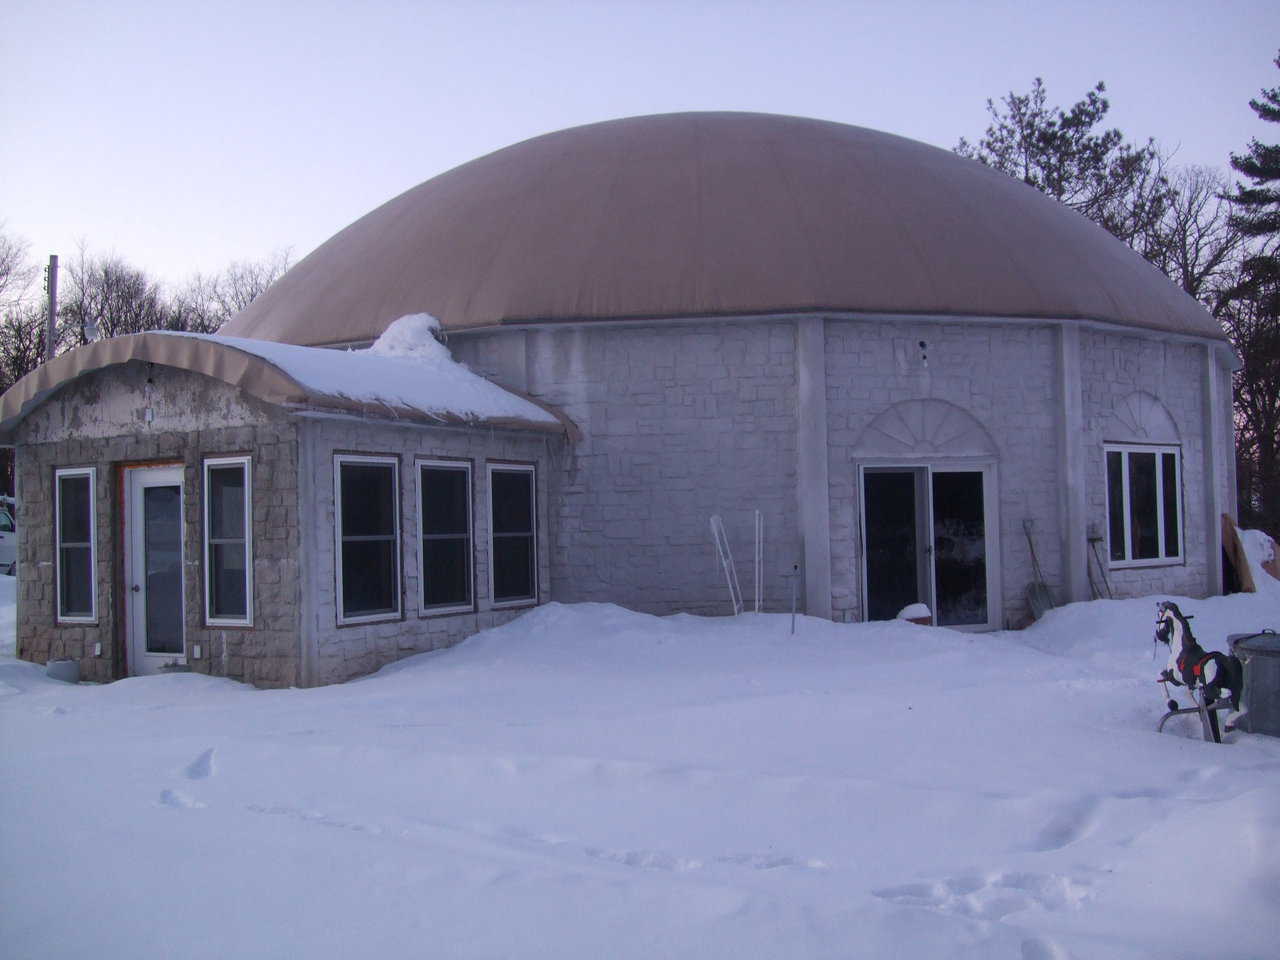 An Orion in Winter — The Pembers decided on an Orion, a Monolithic Dome style fashioned with straight walls or panels joined into a circle and topped by a dome.